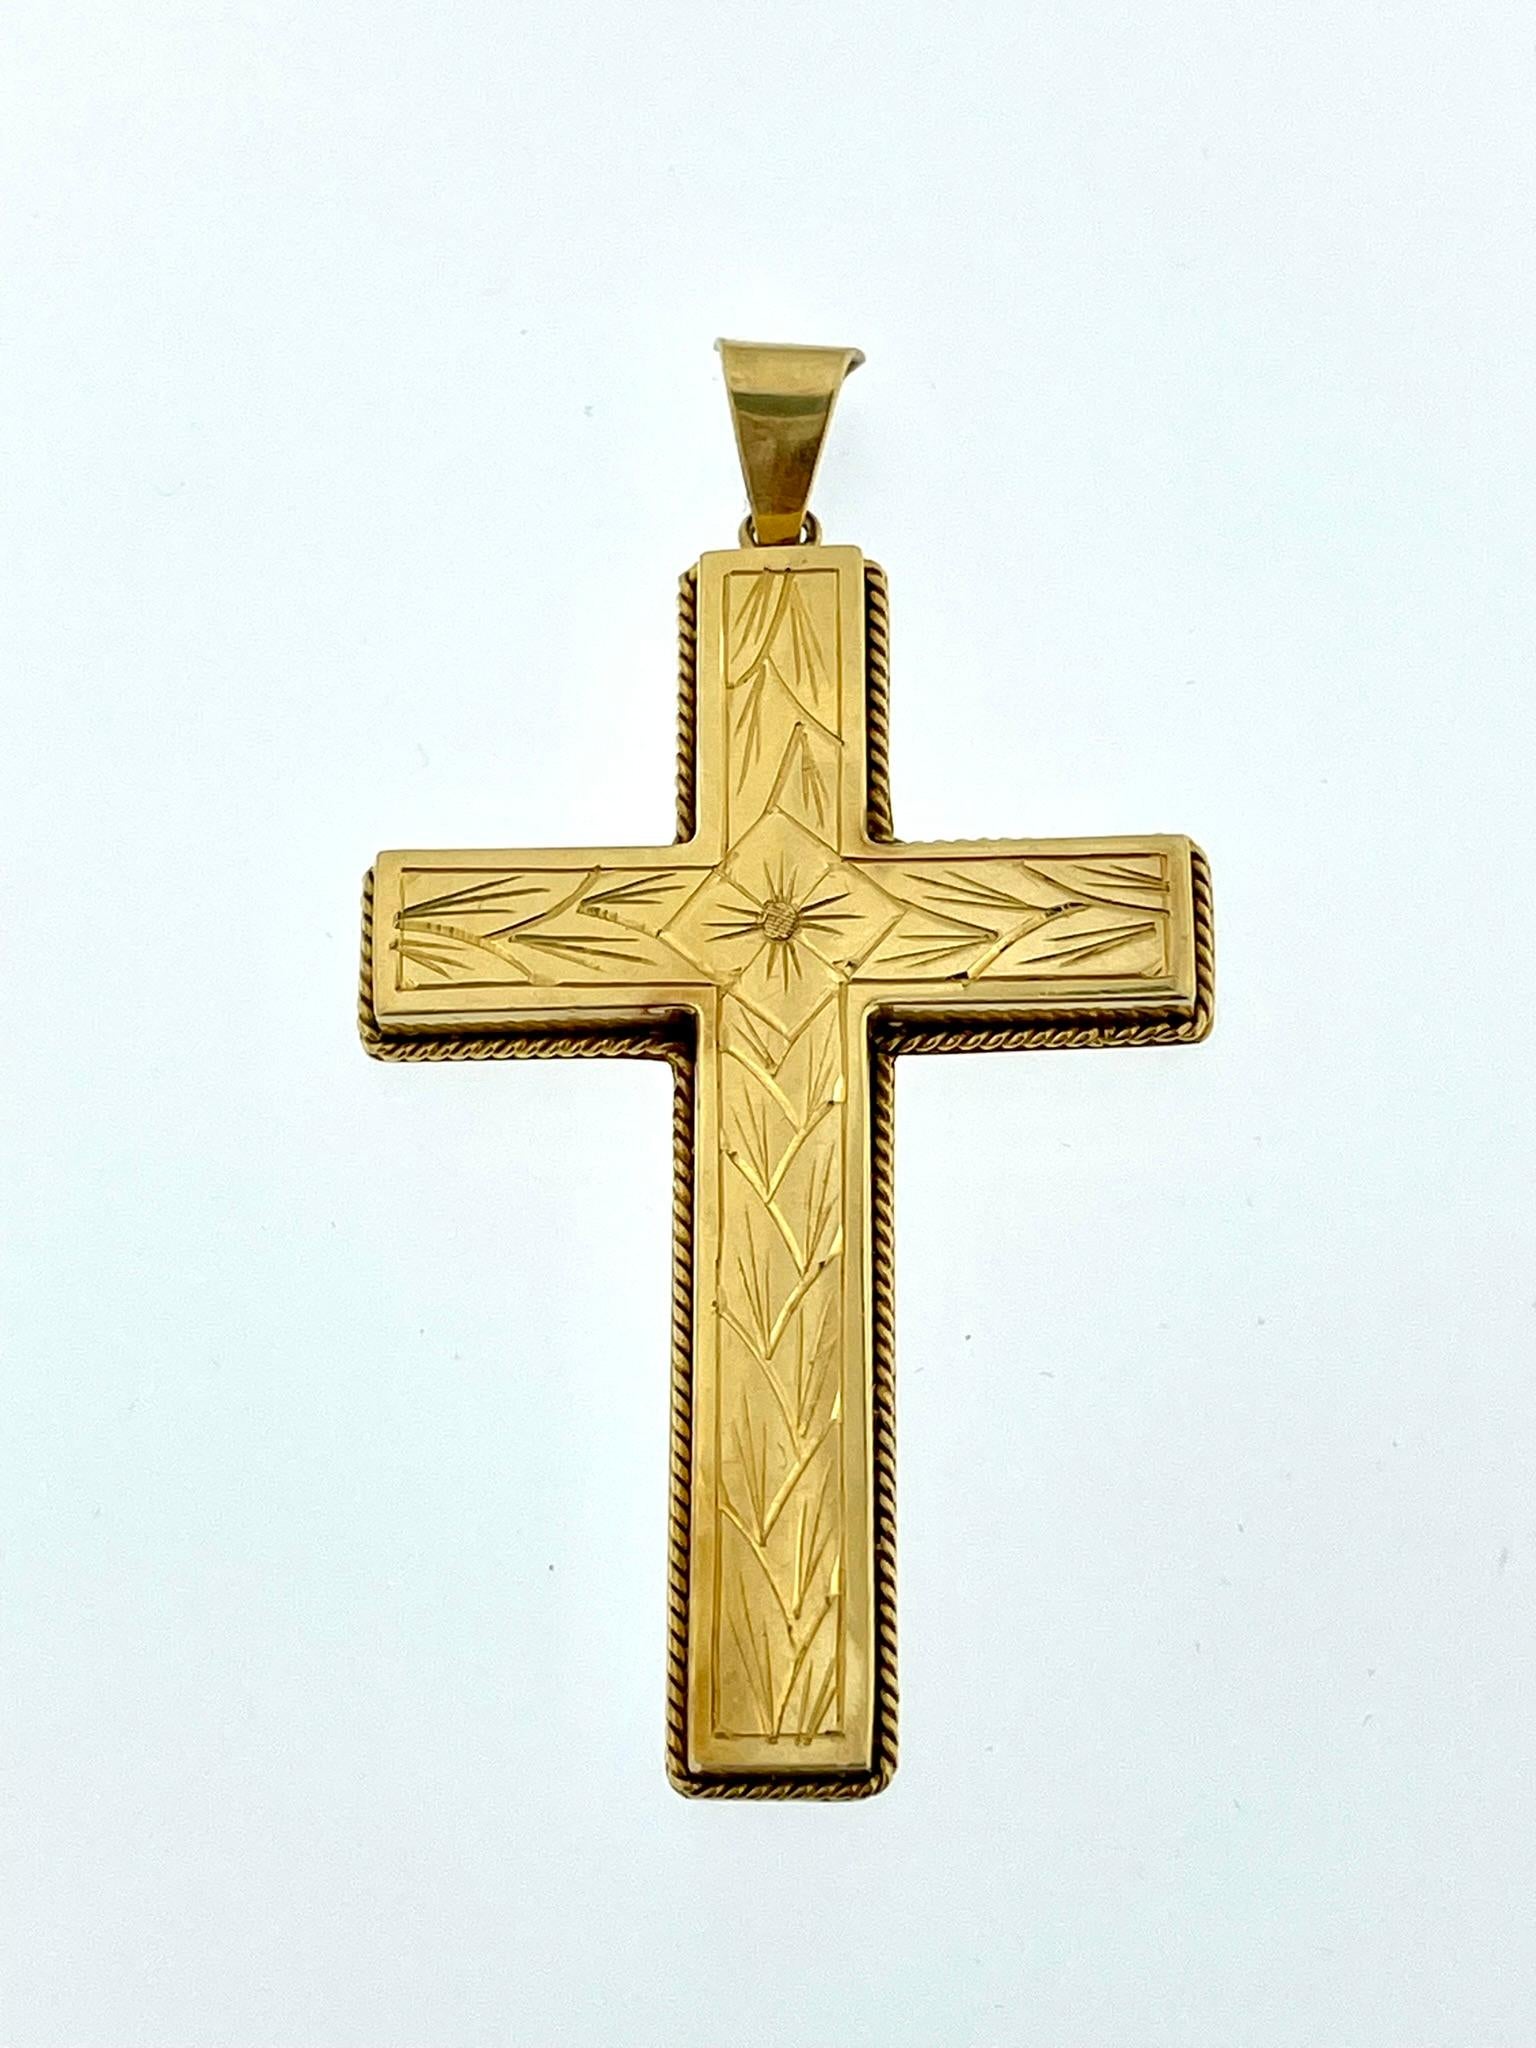 The Swiss 18kt Yellow Gold Cross with Flower Patterns is a meticulously crafted and exquisite piece of jewelry. It is a stunning representation of artisanal craftsmanship, featuring intricate hand-carved details and a unique wire technique. The